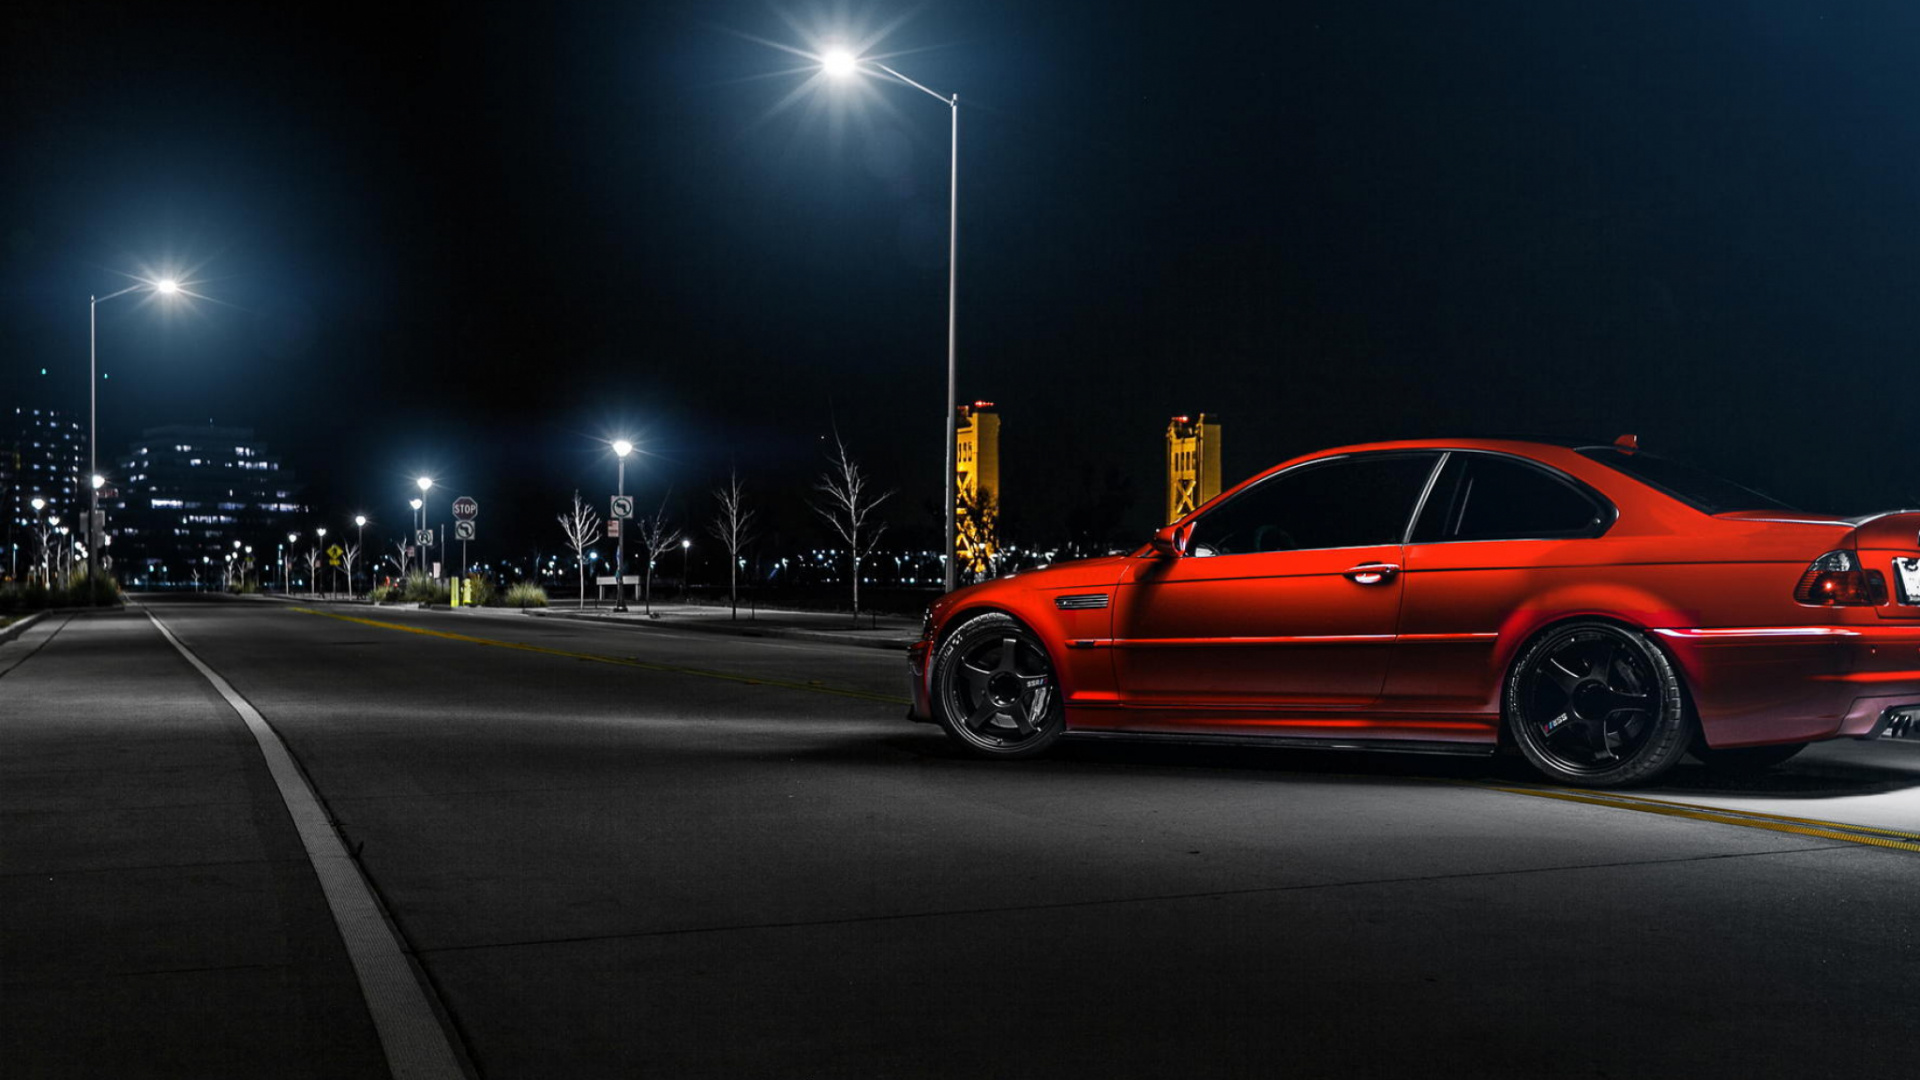 Orange Coupe on Road During Night Time. Wallpaper in 1920x1080 Resolution